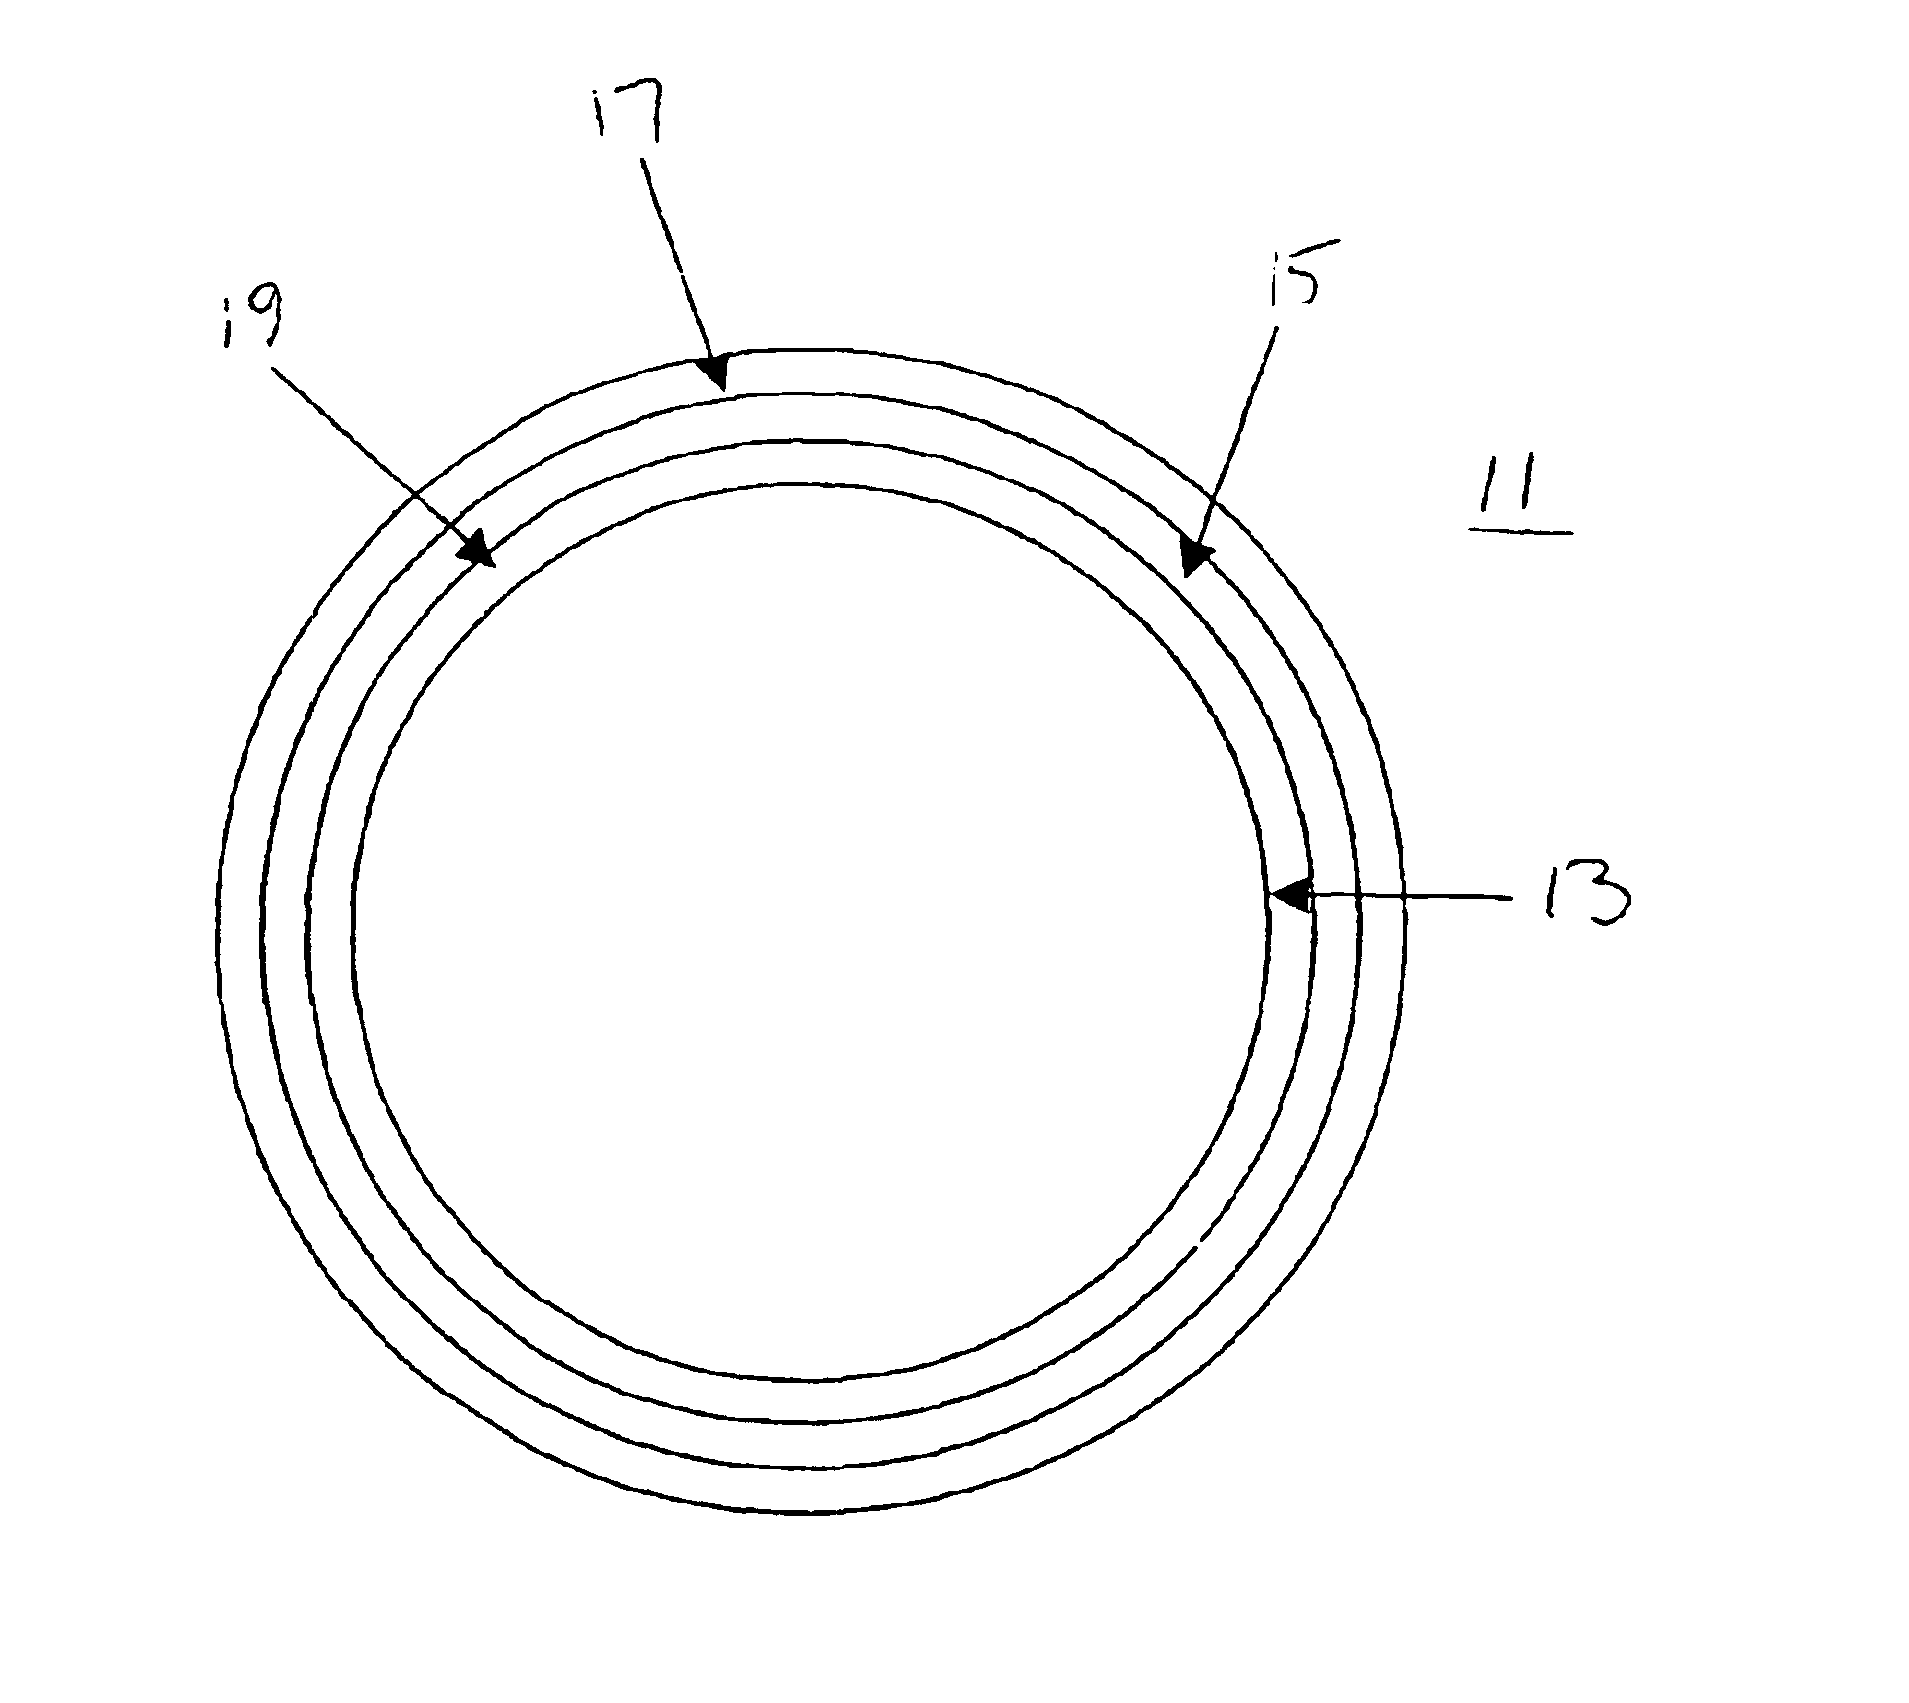 Sound jacket for noise reduction in refrigeration apparatus